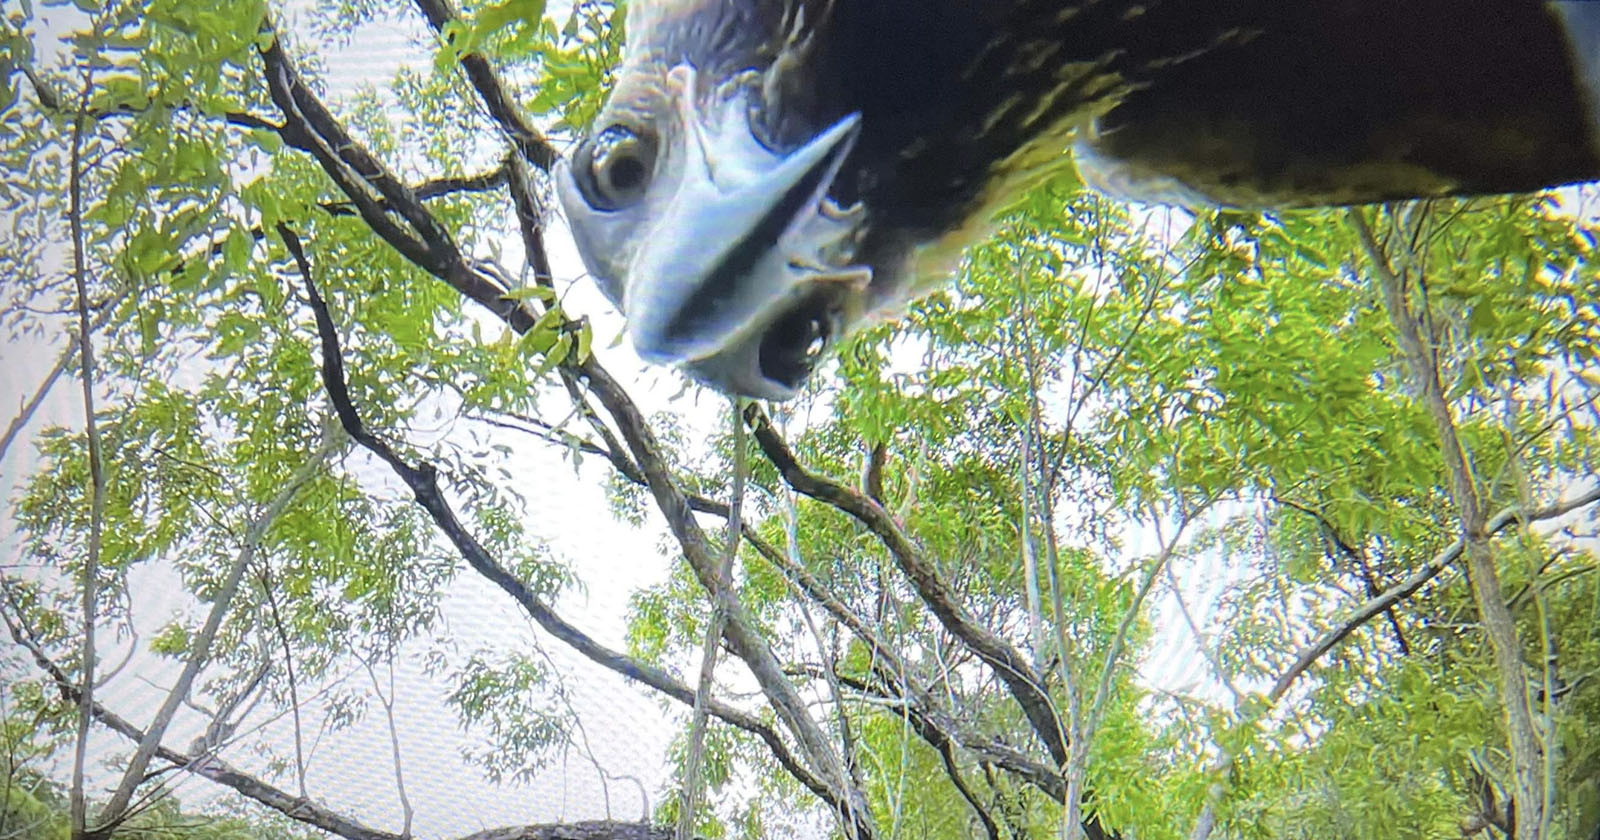 Eagle Steals Photographer’s Drone and Takes Selfie